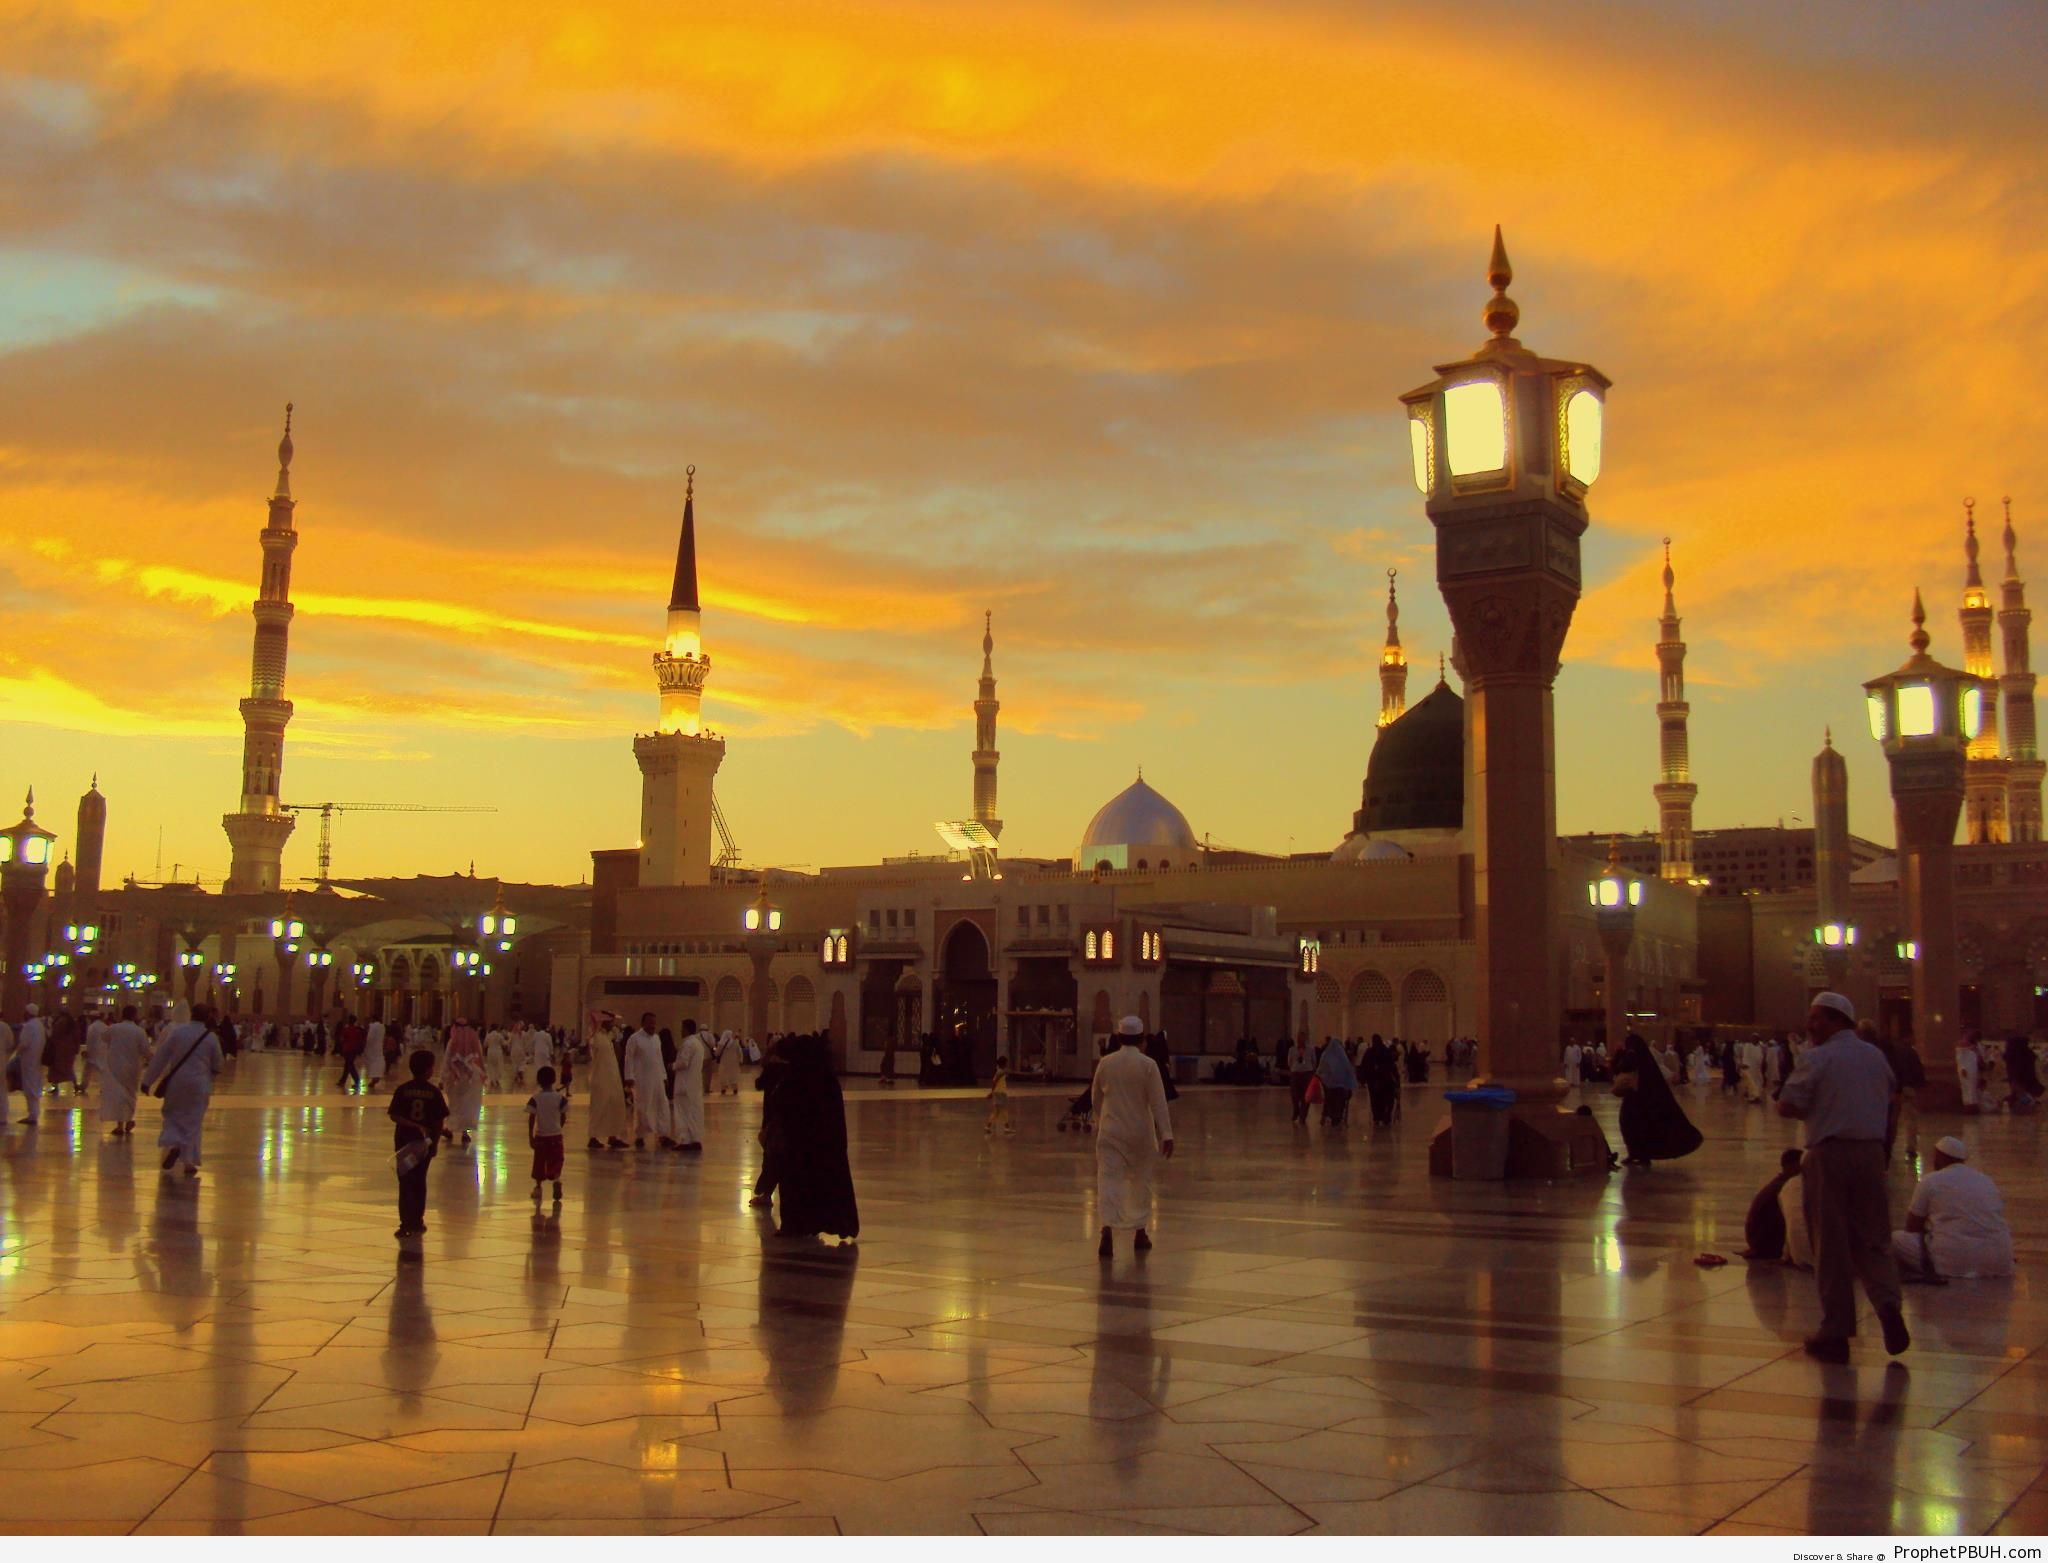 al-Masjid an-Nabawi (Mosque of the Prophet) at Sunset - Al-Masjid an-Nabawi (The Prophets Mosque) in Madinah, Saudi Arabia -Picture